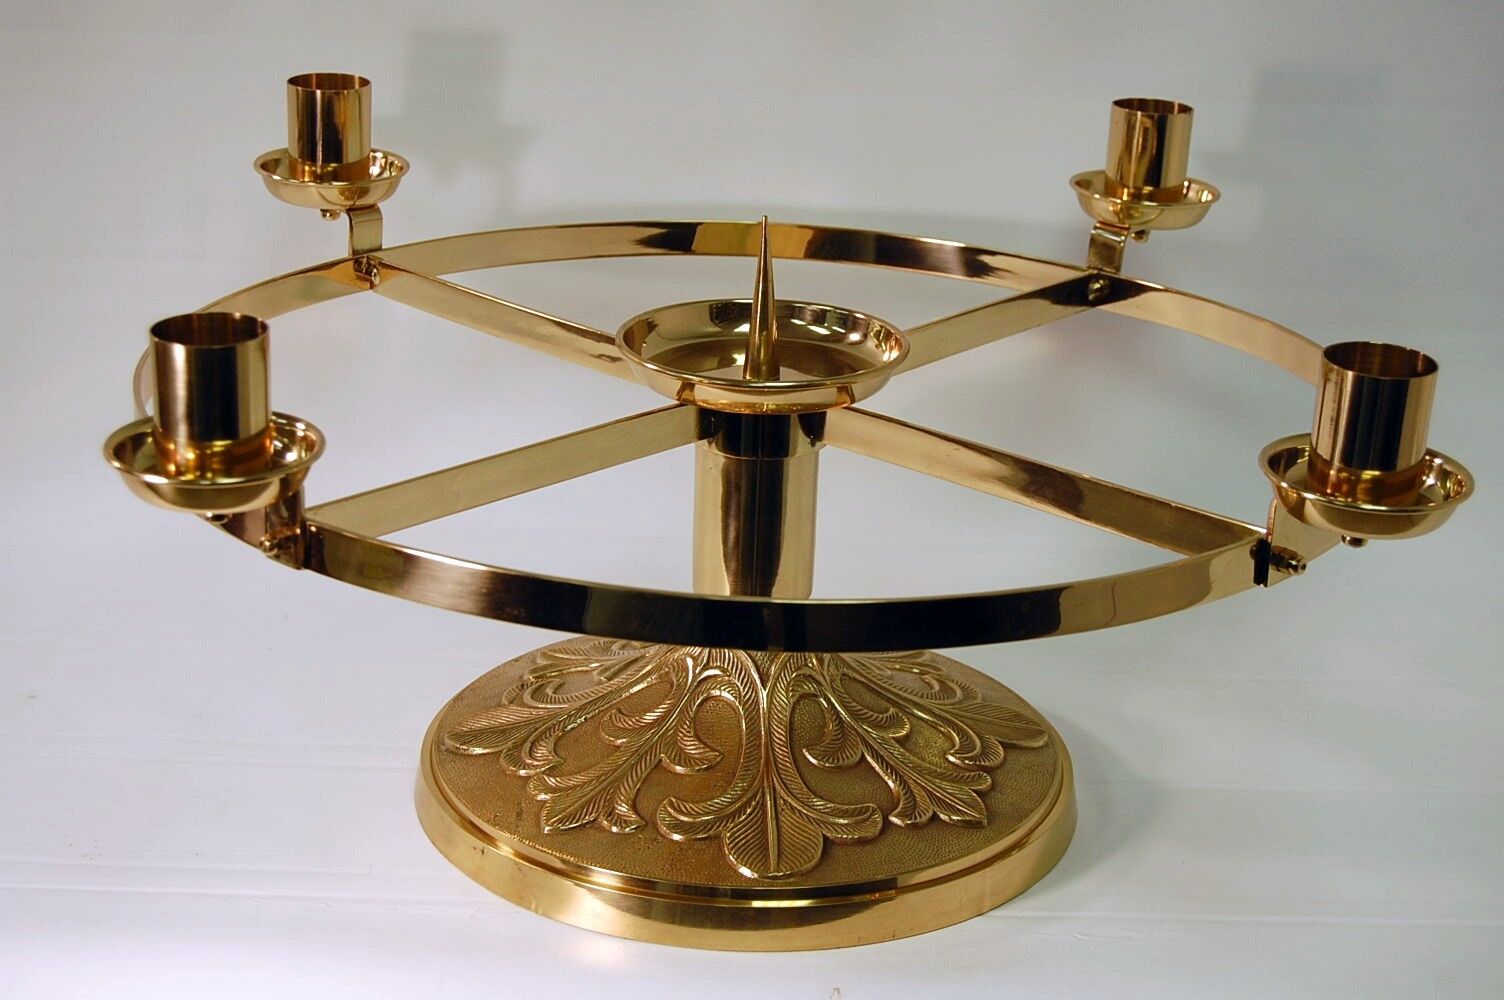 NICE ALTAR TOP ADVENT CANDLE WREATH IN SOLID POLISHED BRASS (CHALICE - CHURCH)